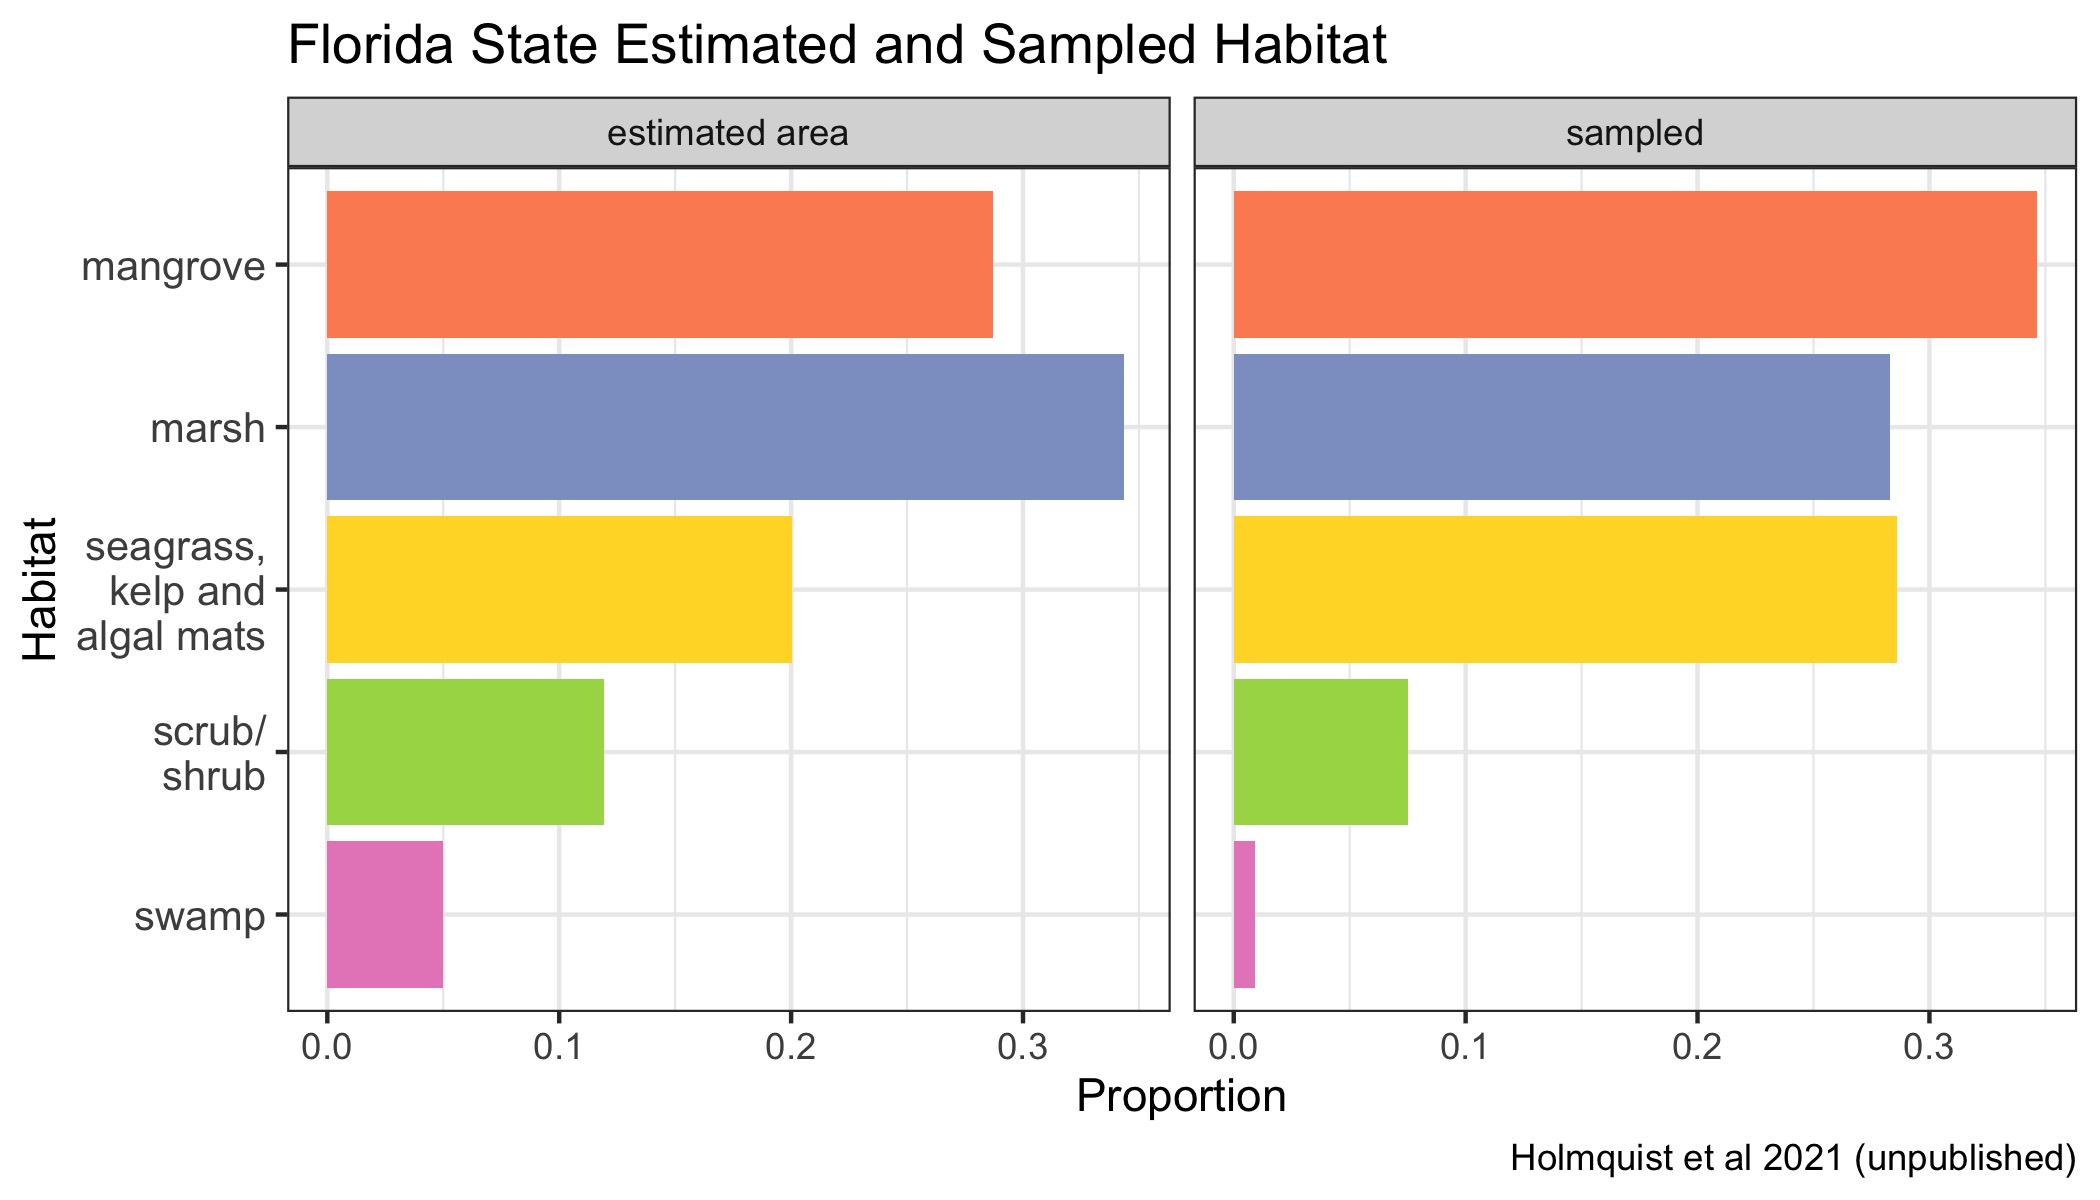 Proportions of various Blue Carbon habitats across Florida state represented in the dataset in proportion to their estimated area. Seagrasses, kelp beds and algal mats are all combined into a single category, because they are combined in the underlying mapping products.